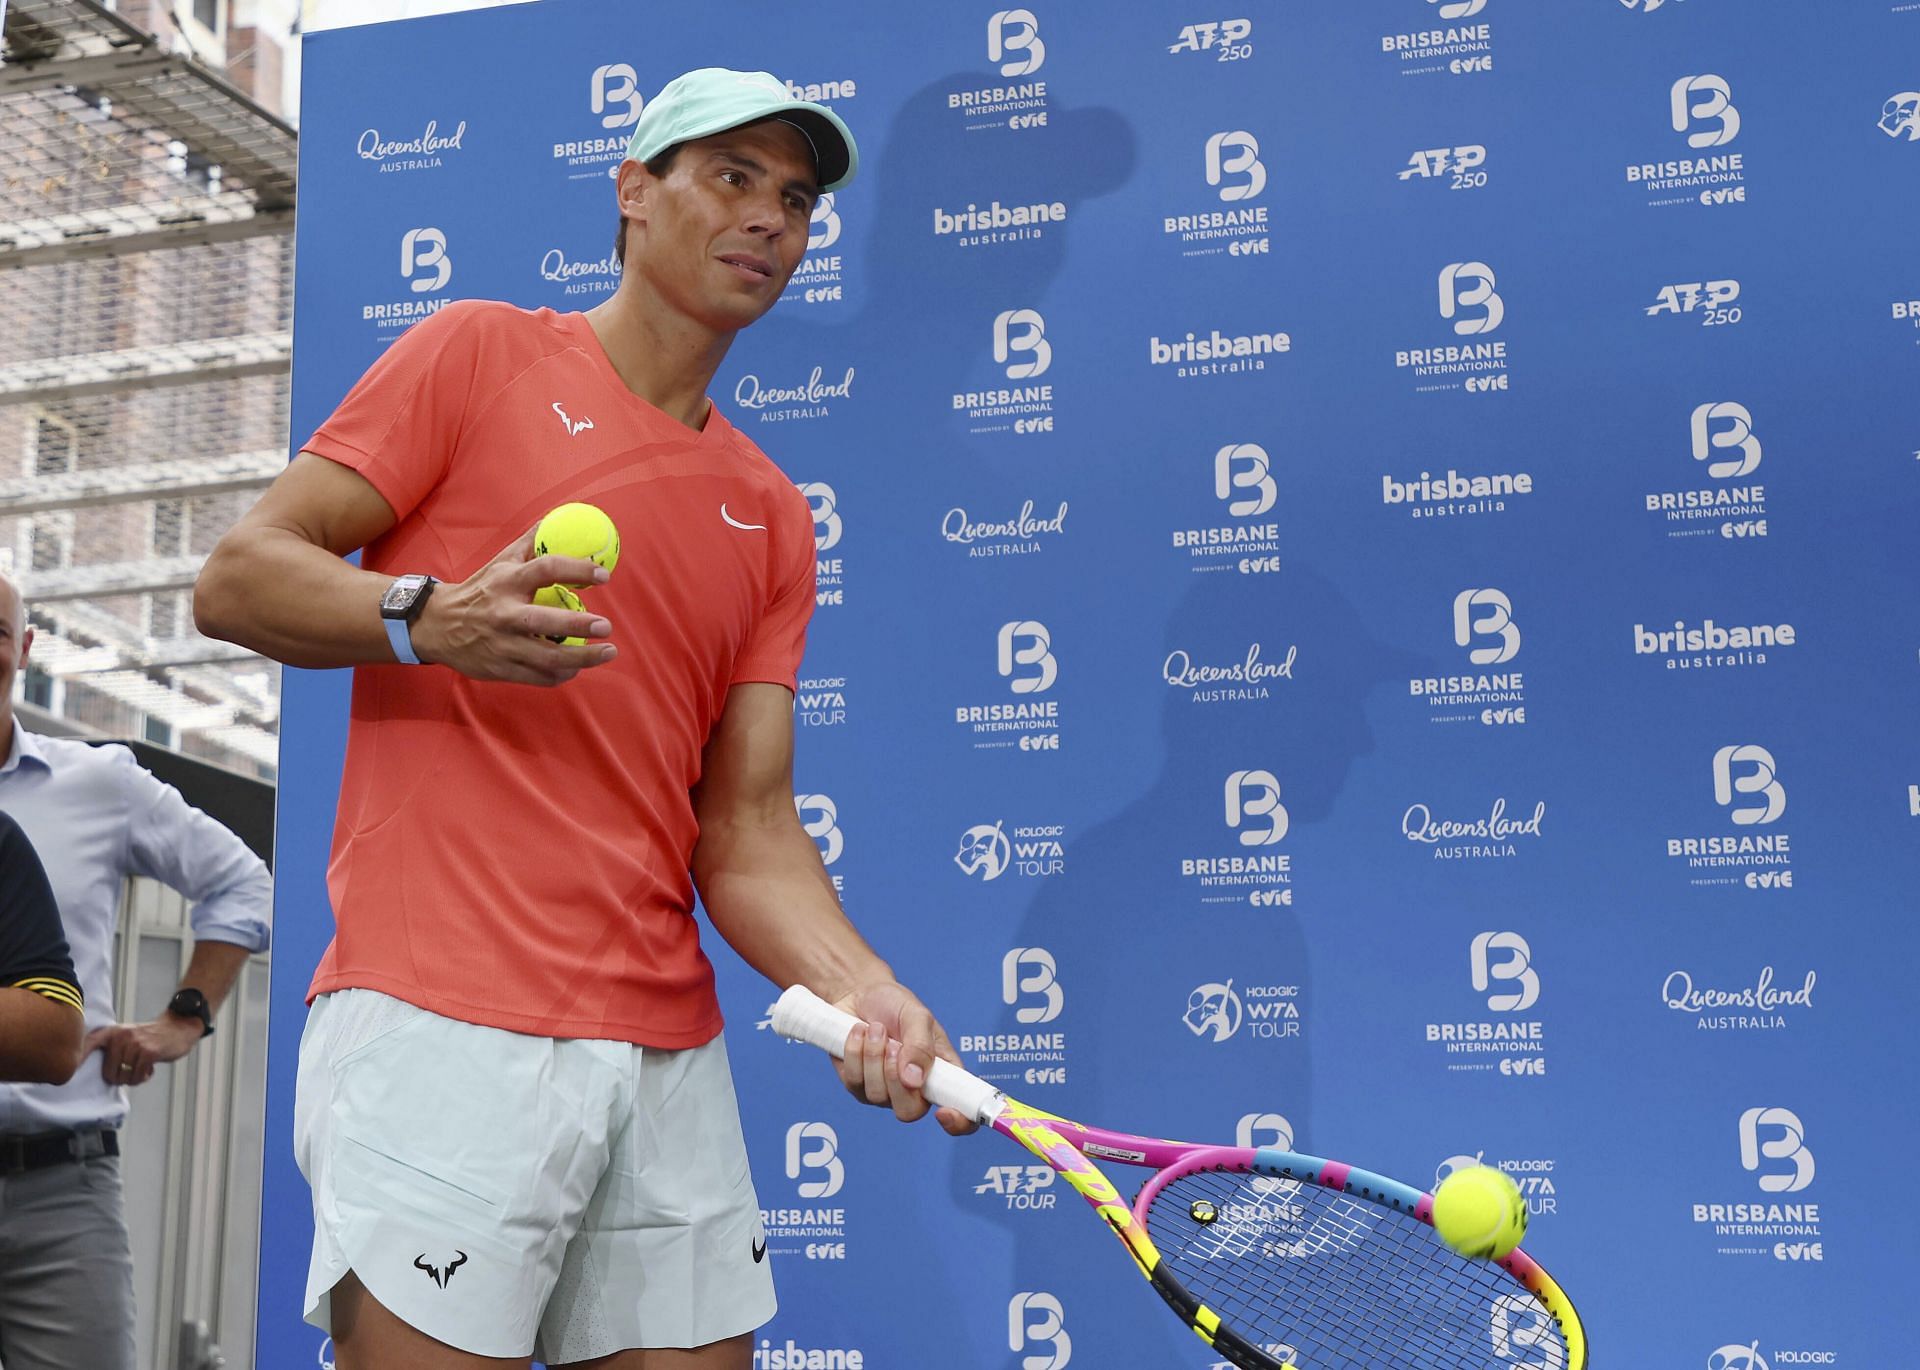 Rafael Nadal will be in action in doubles as well at the Brisbane International